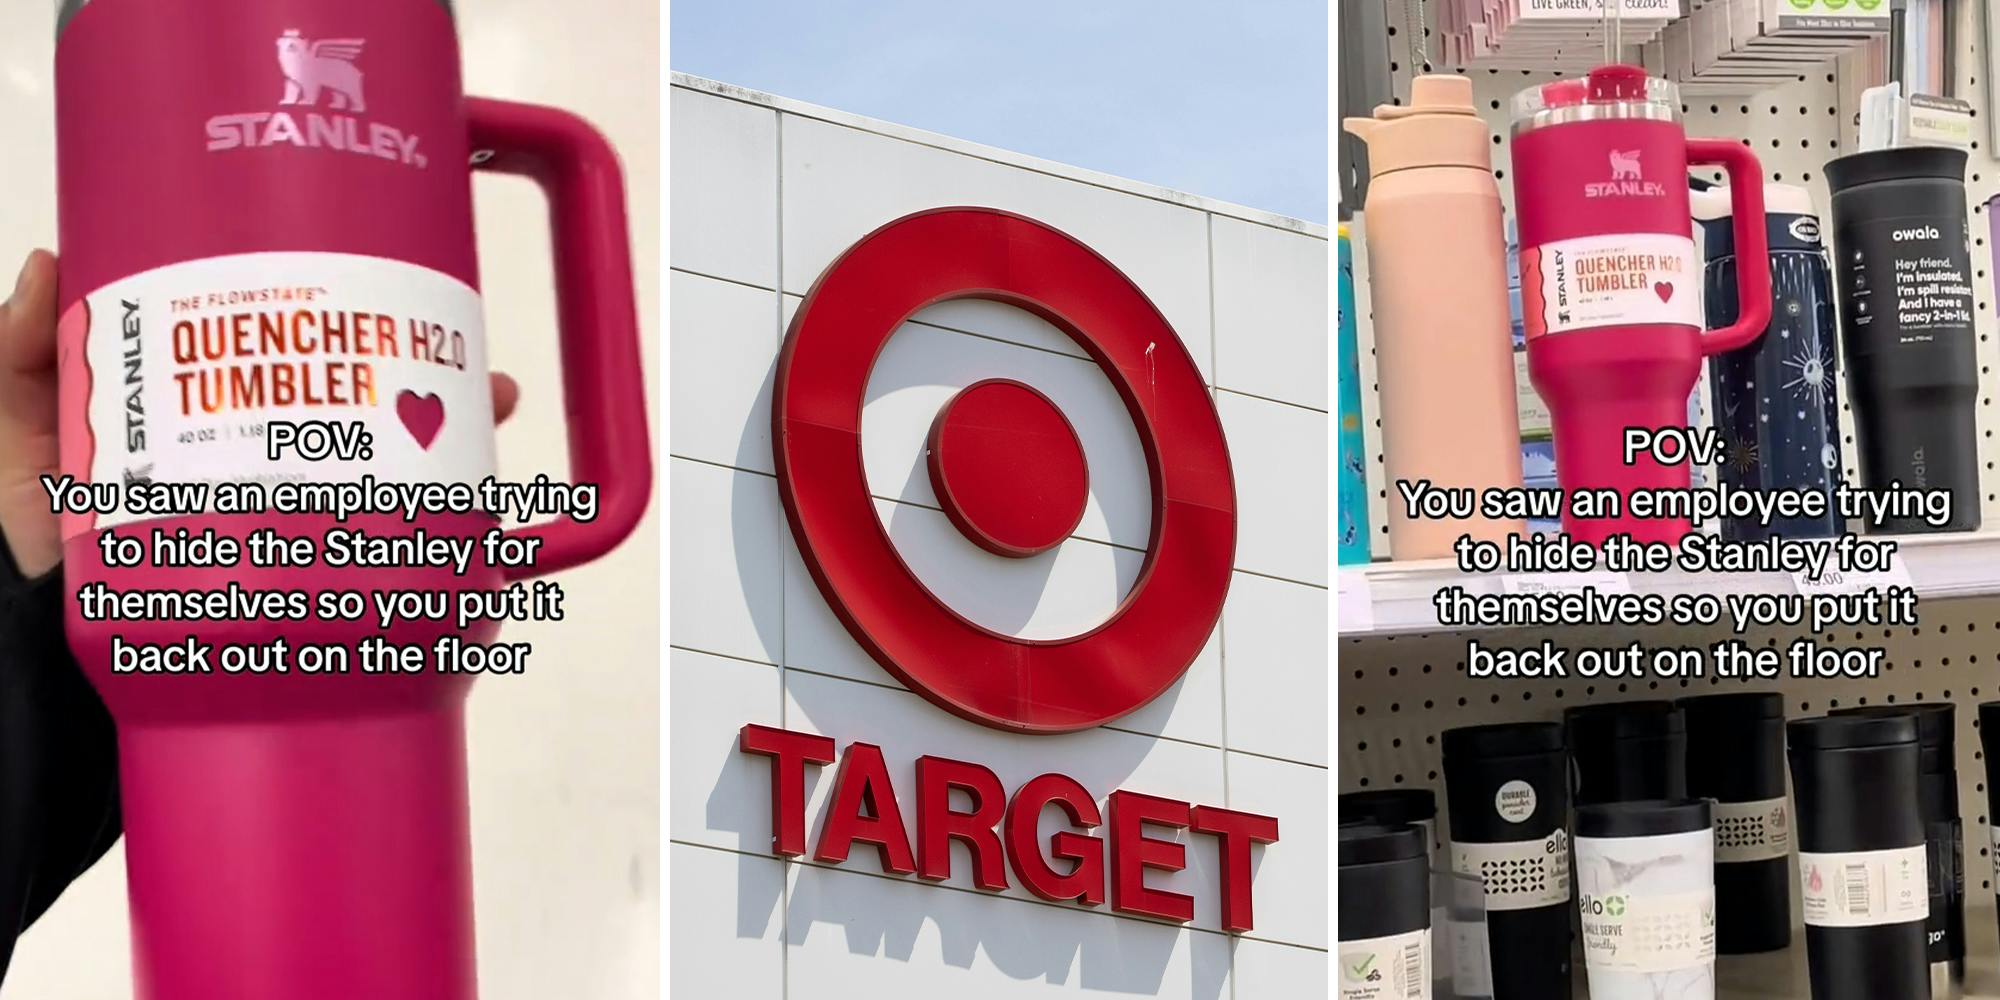 Rose-hued Stanley cups trigger a frenzy among Target shoppers